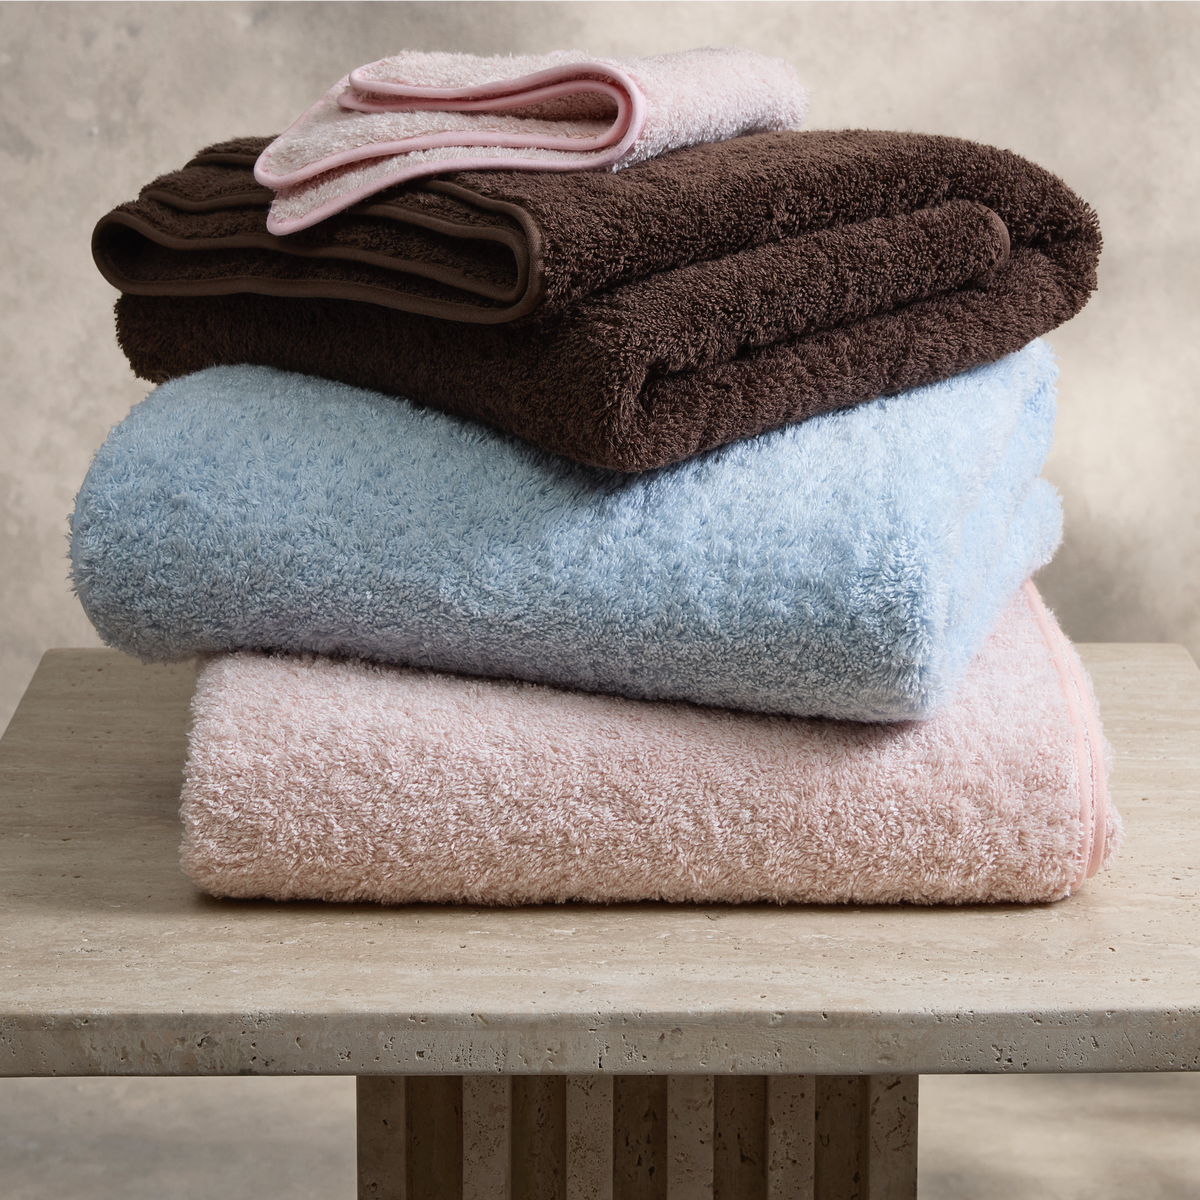 Stack of New Solid Colors of Matouk Cairo Bath Towels Released in 2023